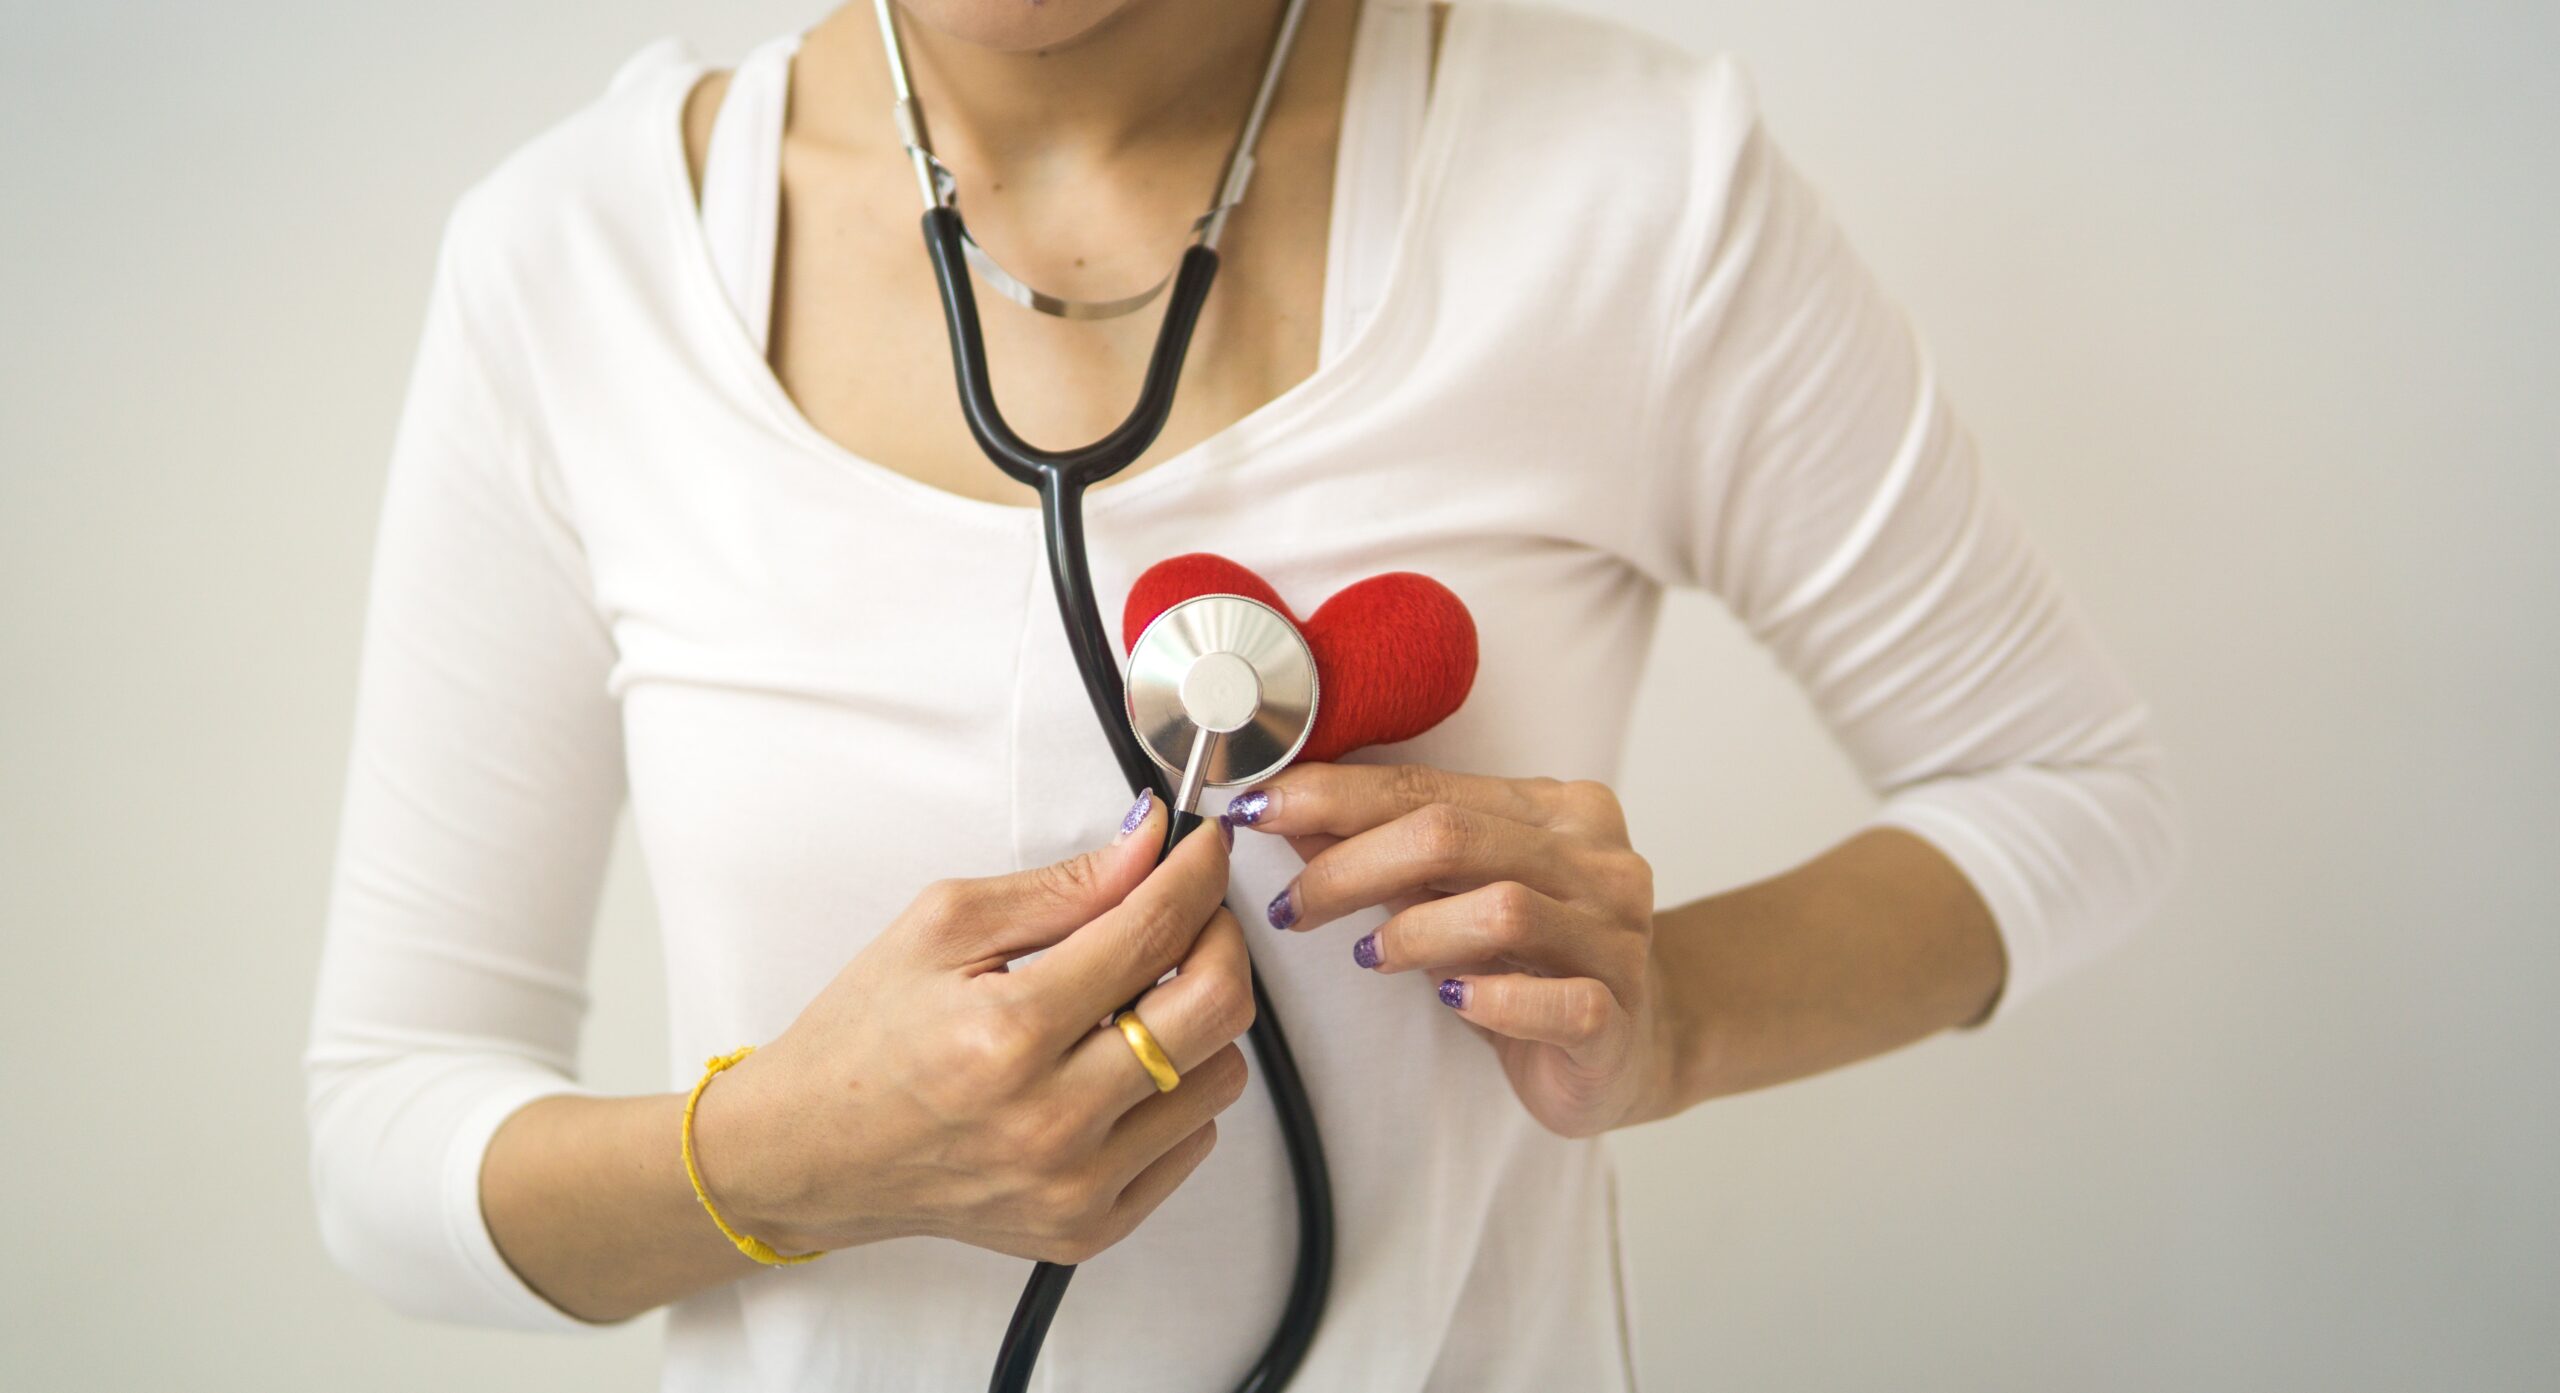 type 2 diabetic holding a stethoscope to her heart